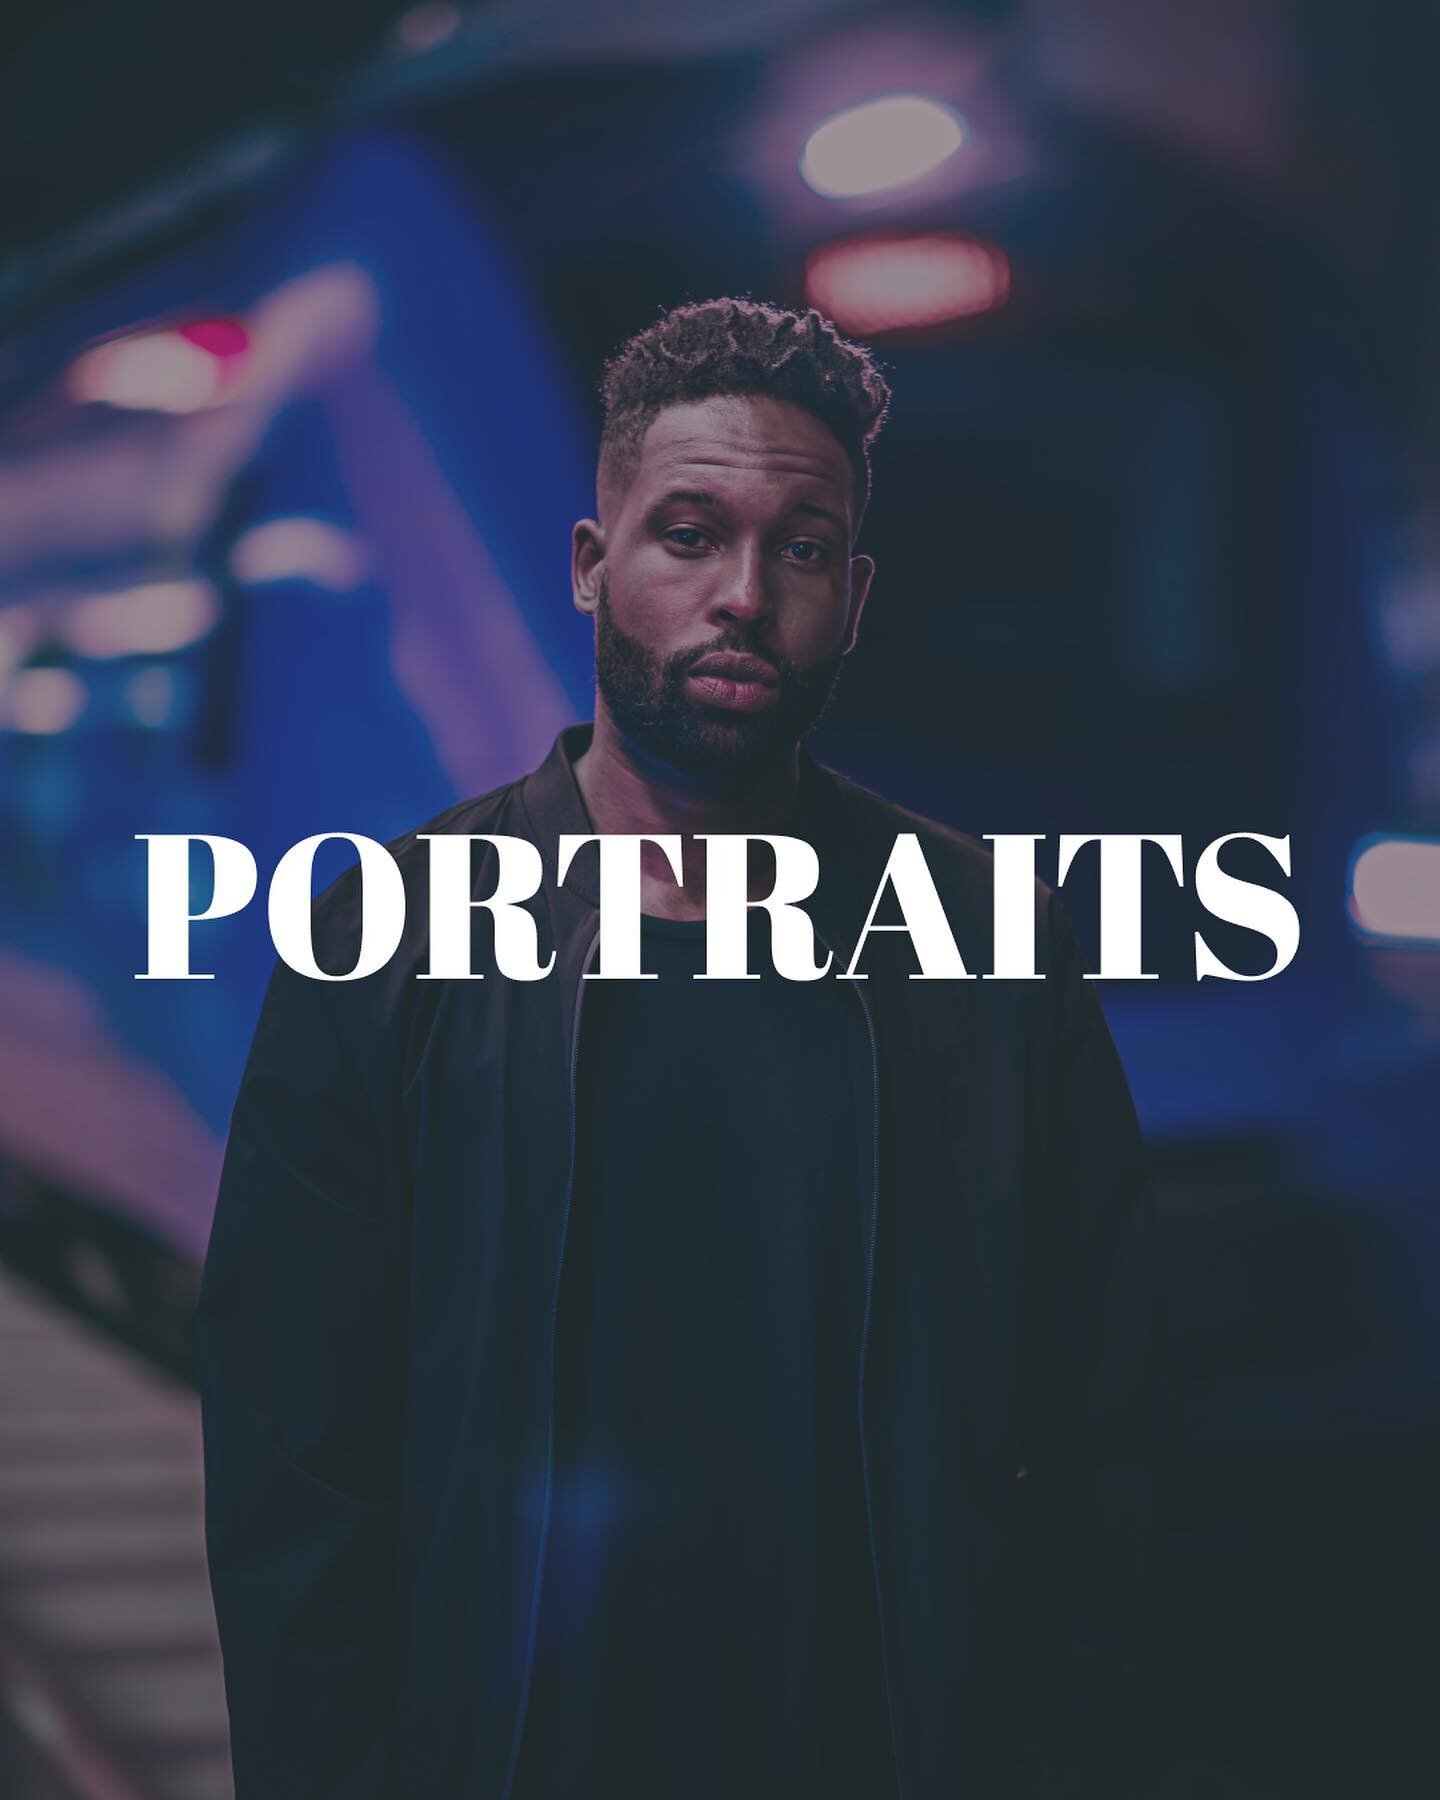 ✨Let your character shine with our specialized Portraits service. Ideal for everyone looking to give their profile a power-boost, from work-life to social scenes, and everything in between 📸. Here&rsquo;s what we bring to the table:

💥⚡️ Power Pics